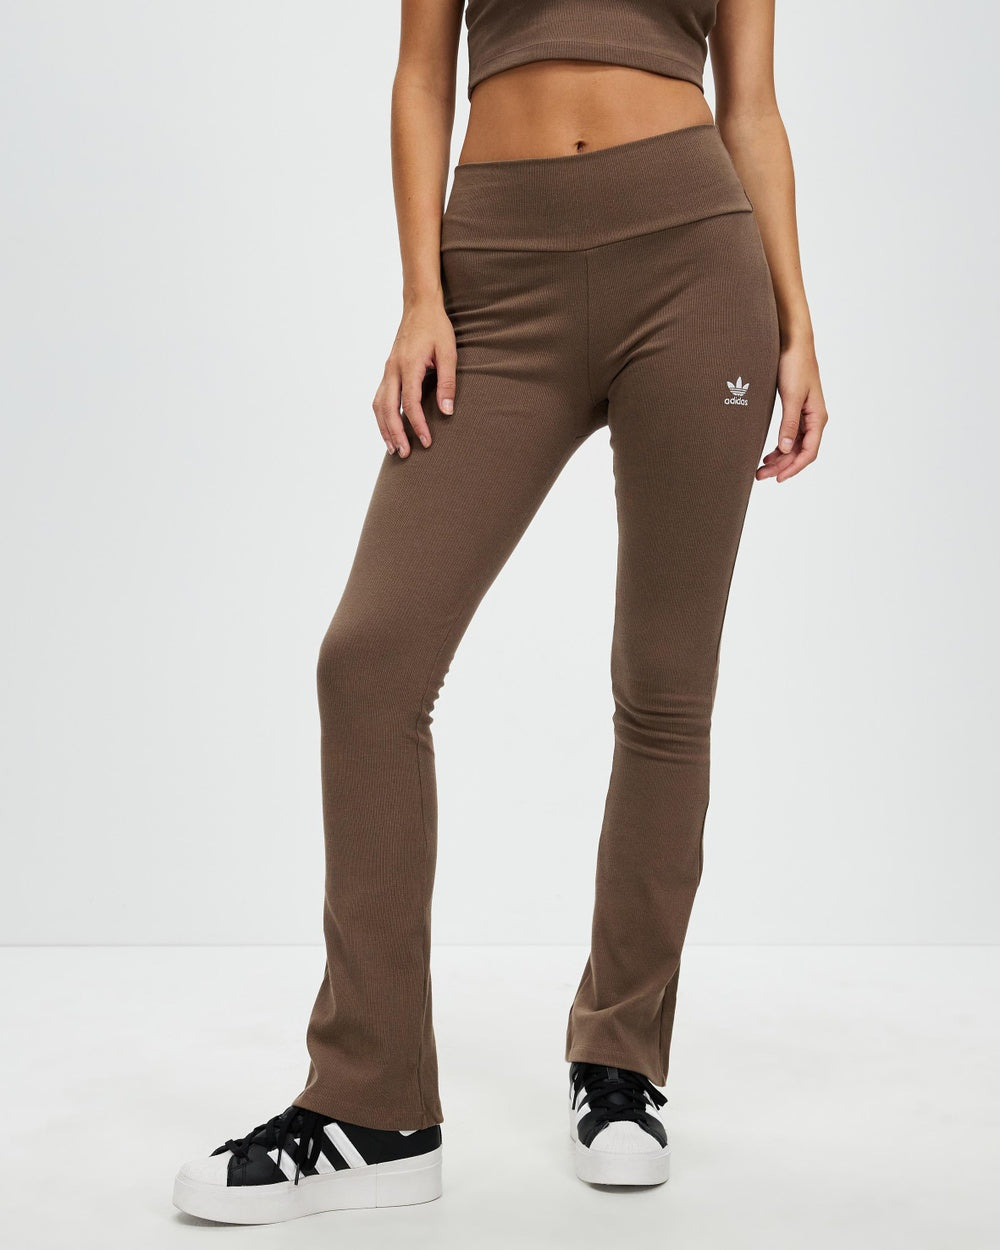 Active Wear Long Pants. Pair with a tank or the navy jumper in this Preview.